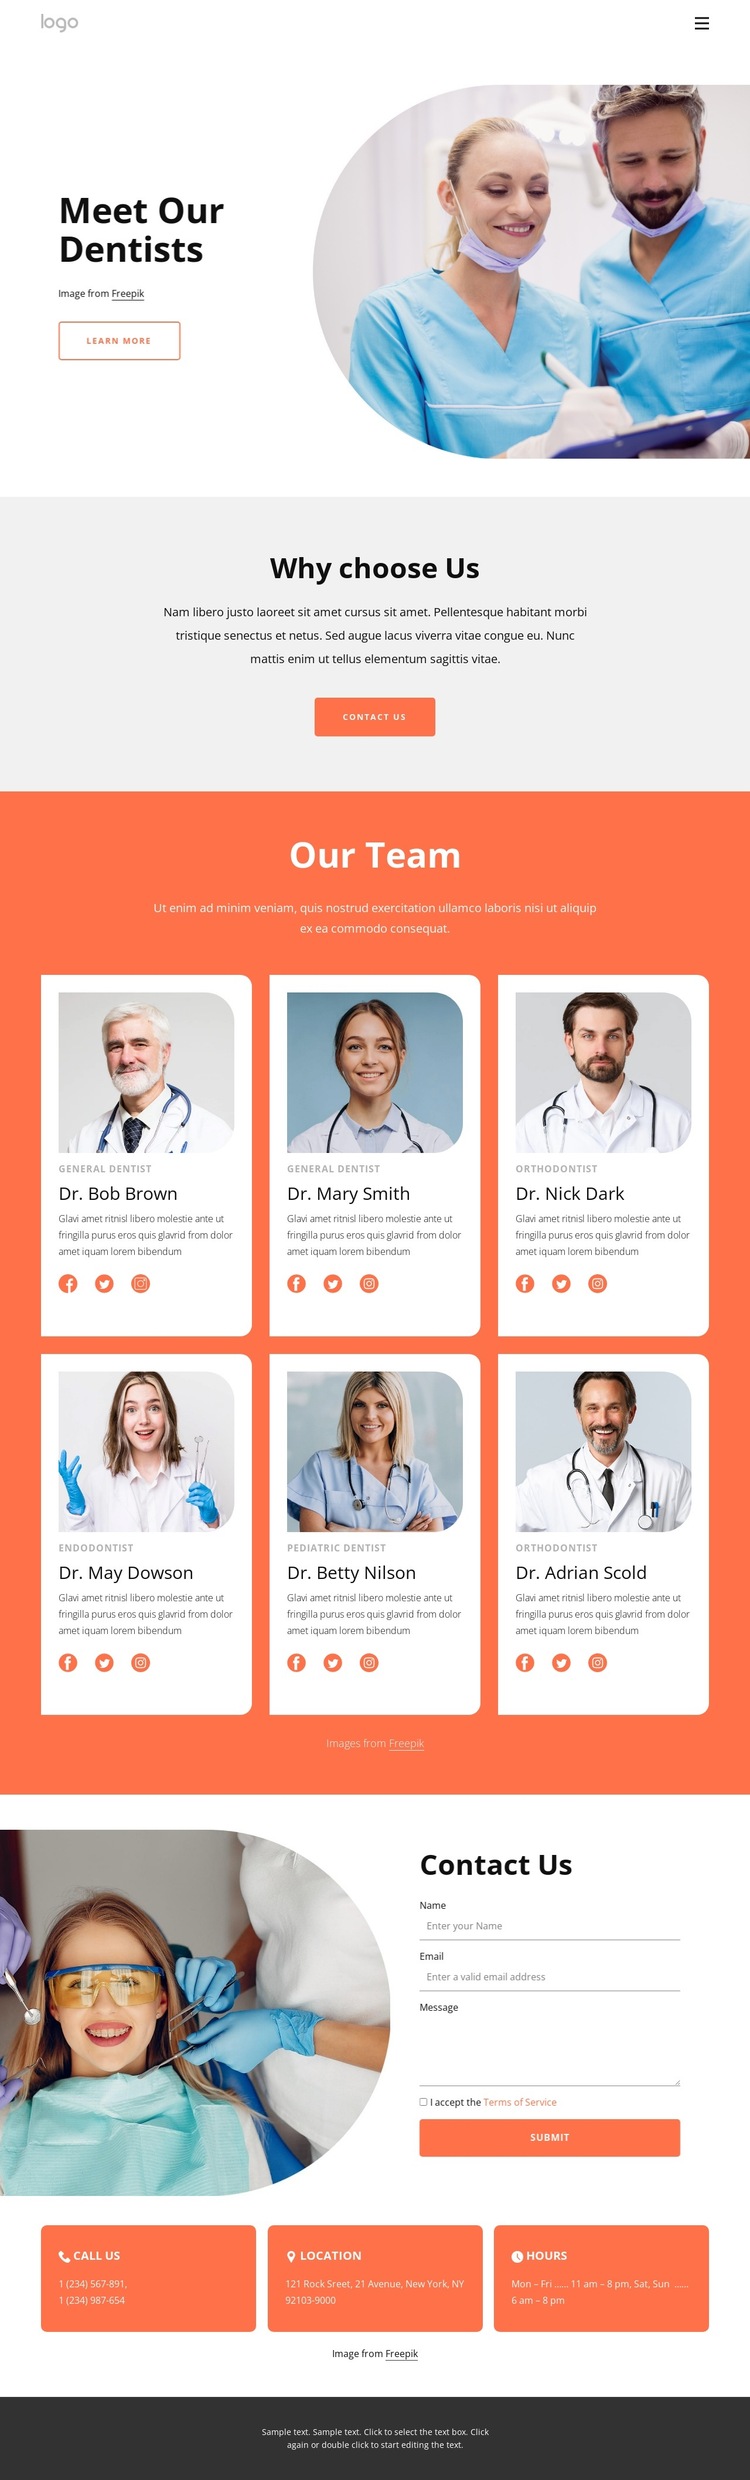 Highly-qualified dentists HTML5 Template